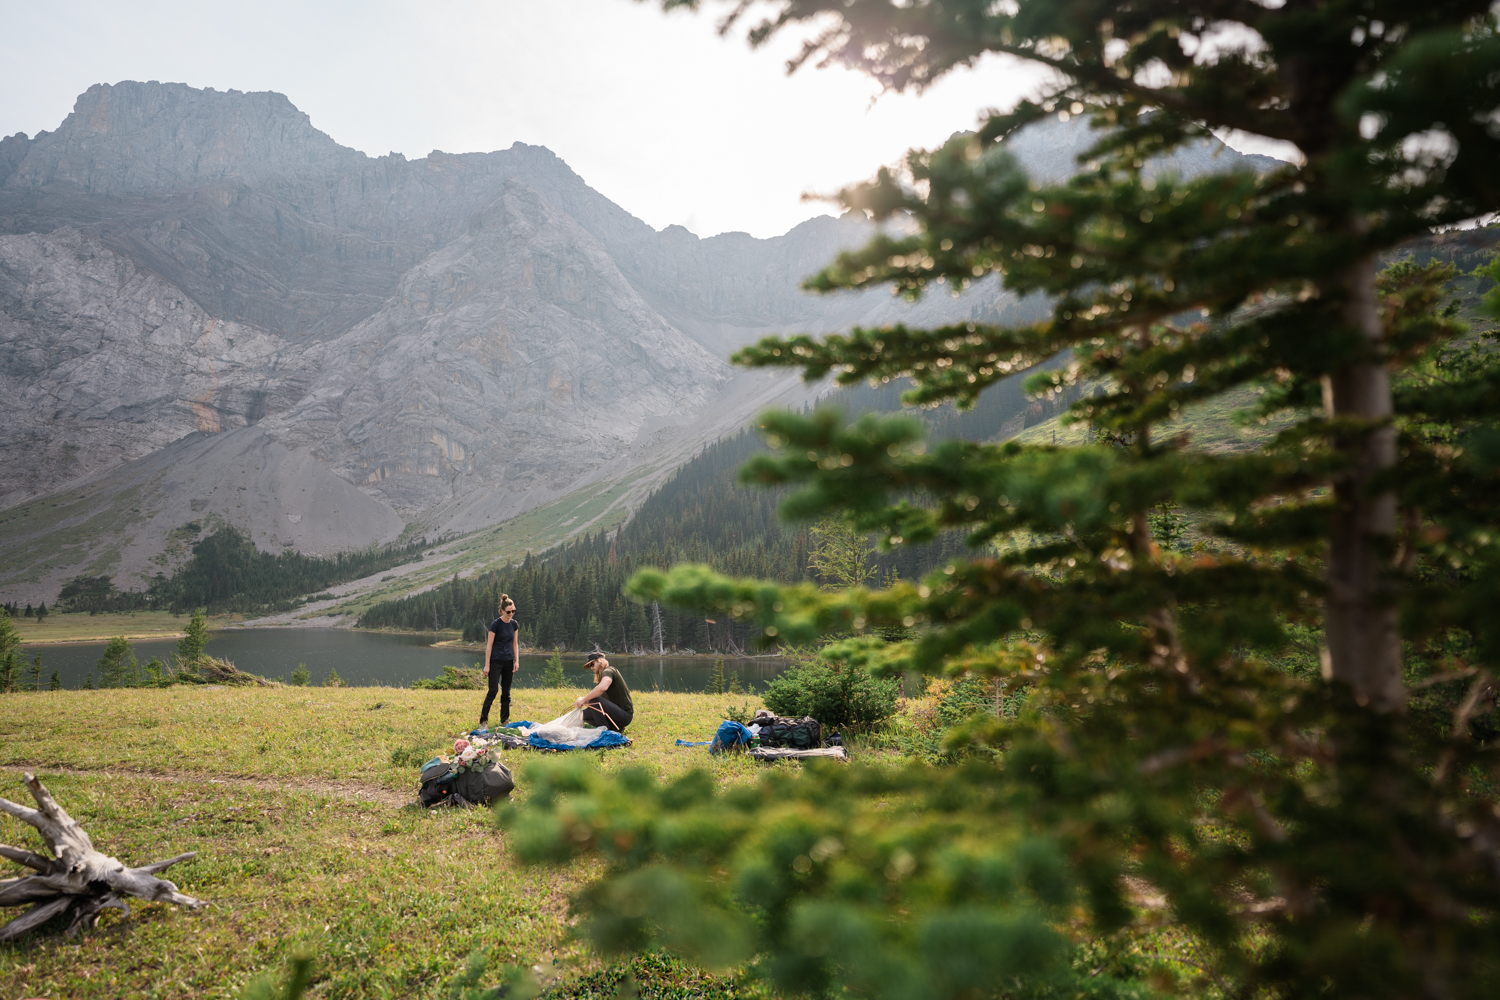 Couple sets up camp in Kananaskis during camping elopement.